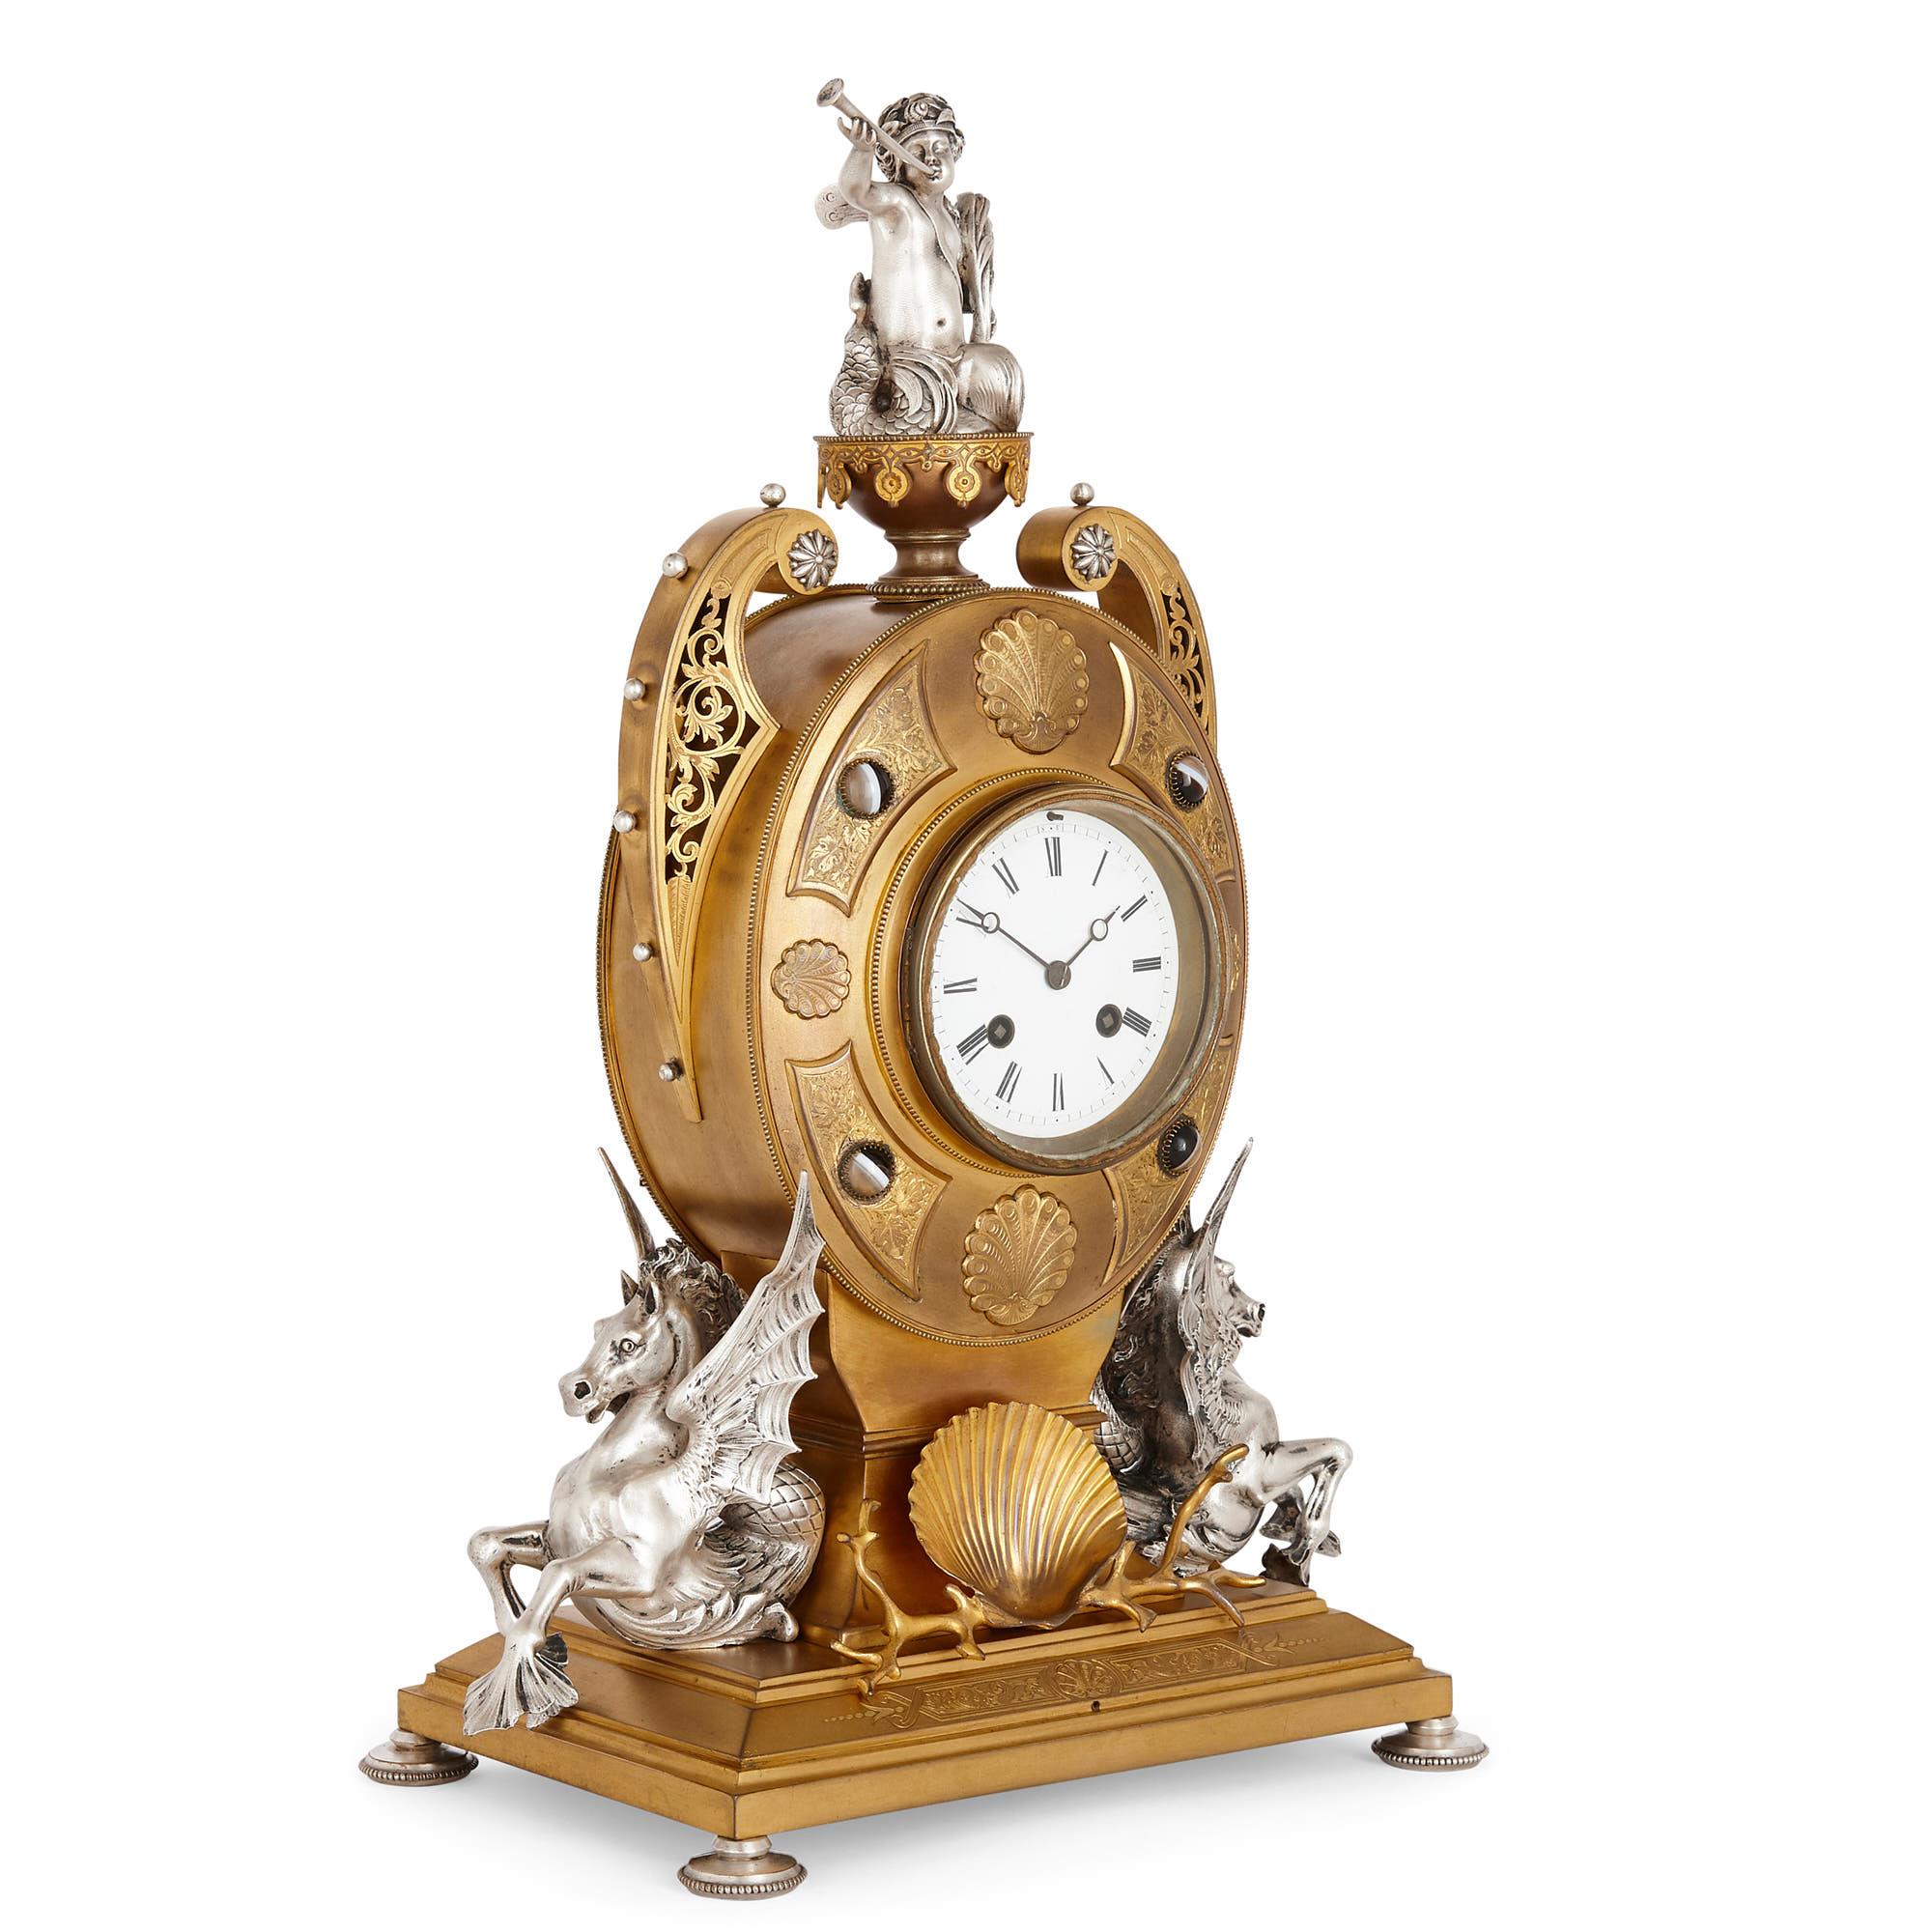 Victorian Ormolu and silvered bronze mantel clock
English, 1871
Measures: Height 50cm, width 36cm, depth 19cm

The clock is a fine work in silvered and gilt bronze and features outstanding decorative detailing throughout. In particular, the